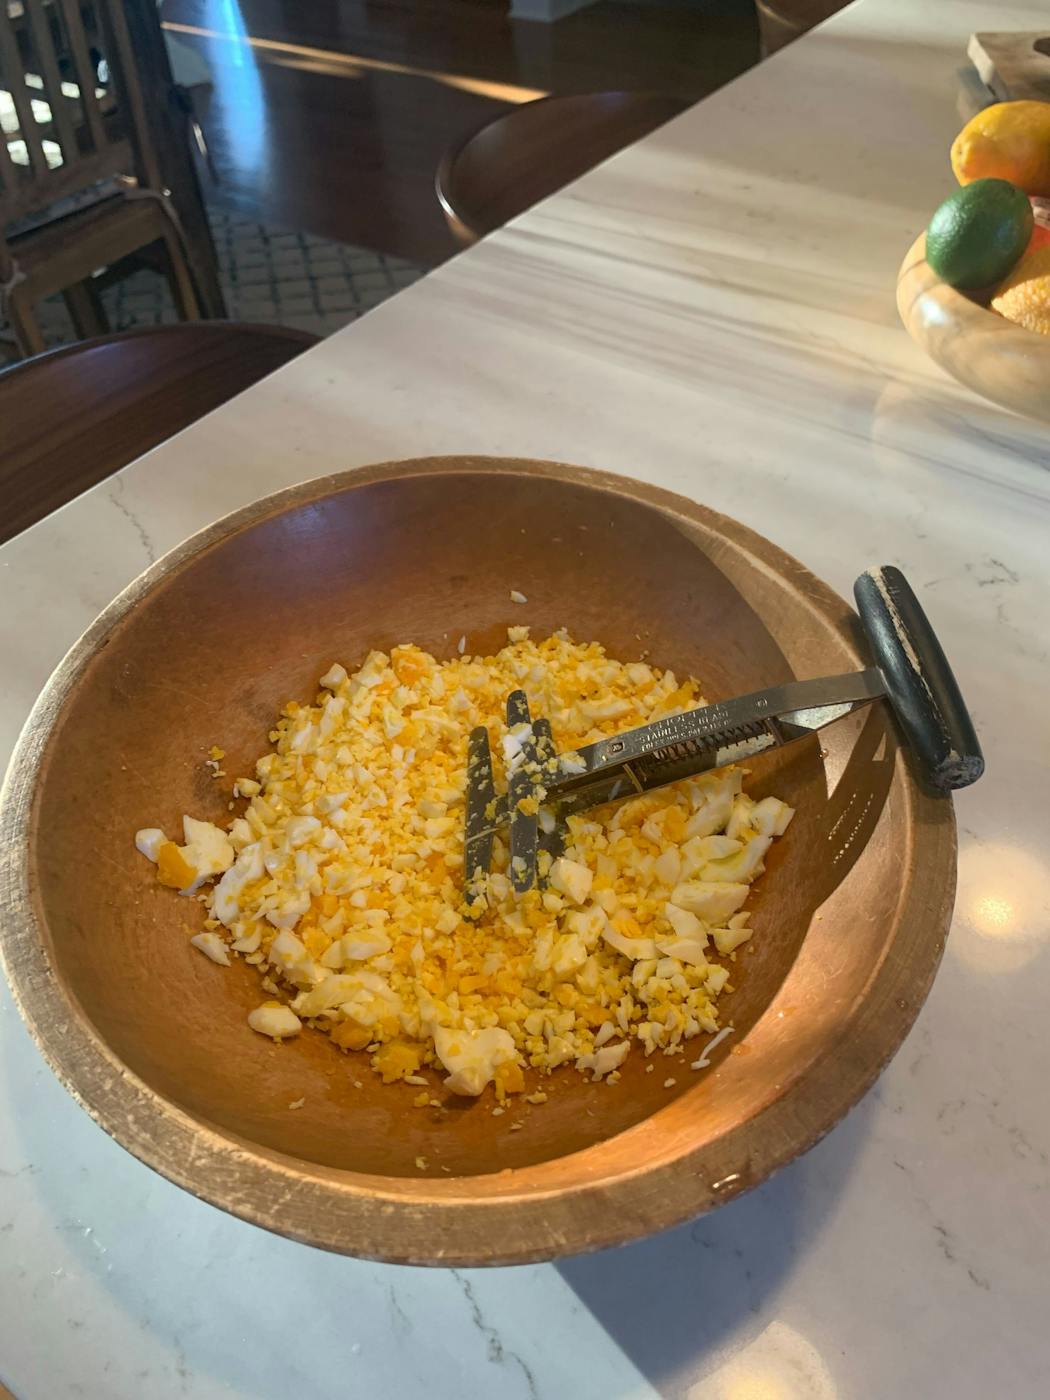 When Gayle Sherman Crandell's mom passed away, the one possession she wanted more than anything was a 1940s-era egg chopper that her mother used to make her signature egg salad. Sherman Crandell said it symbolized her childhood.